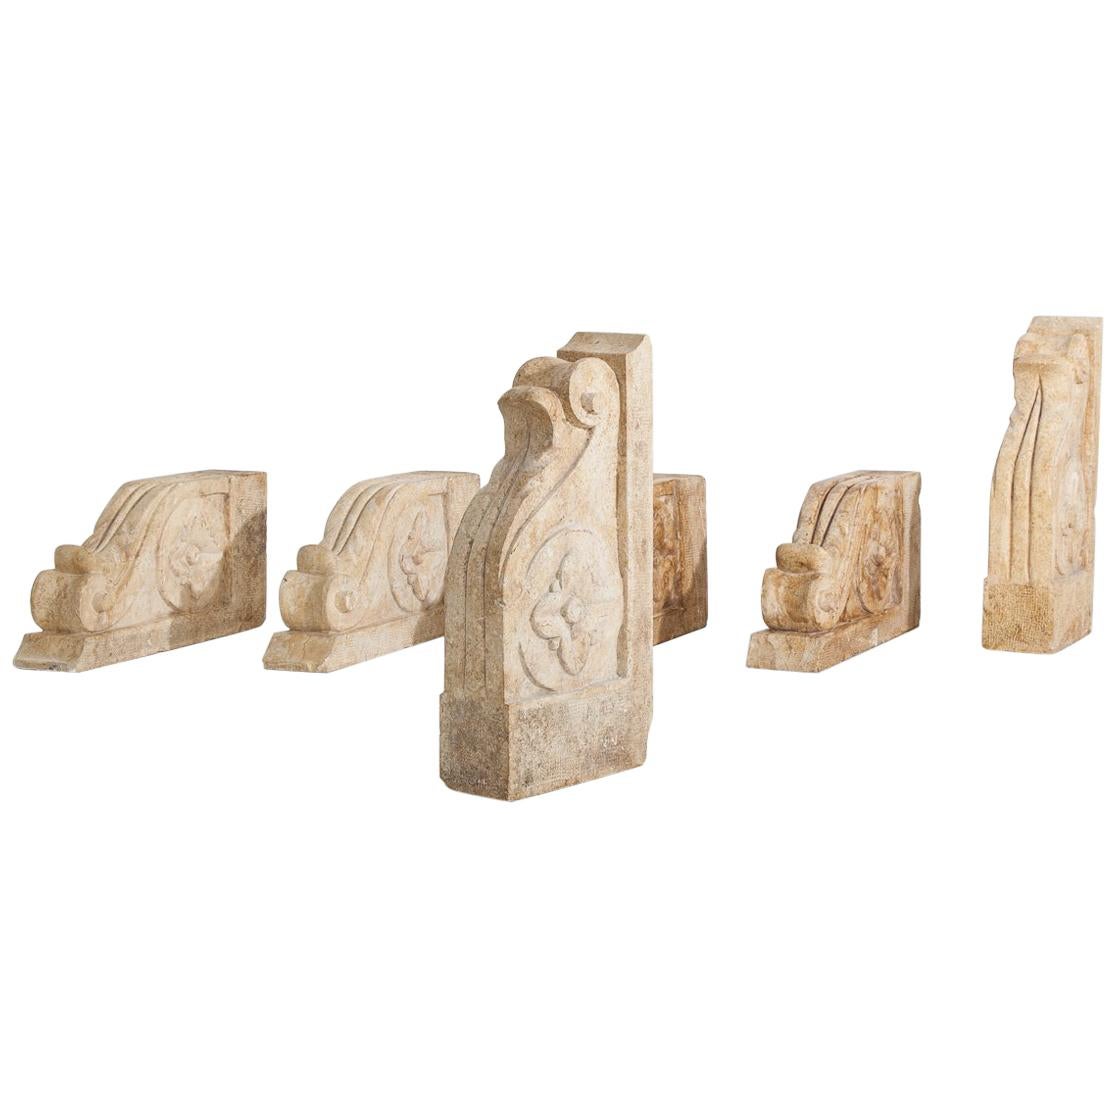 Set of Large 18th-19th Century Stone Corbels, Architectural Antiques